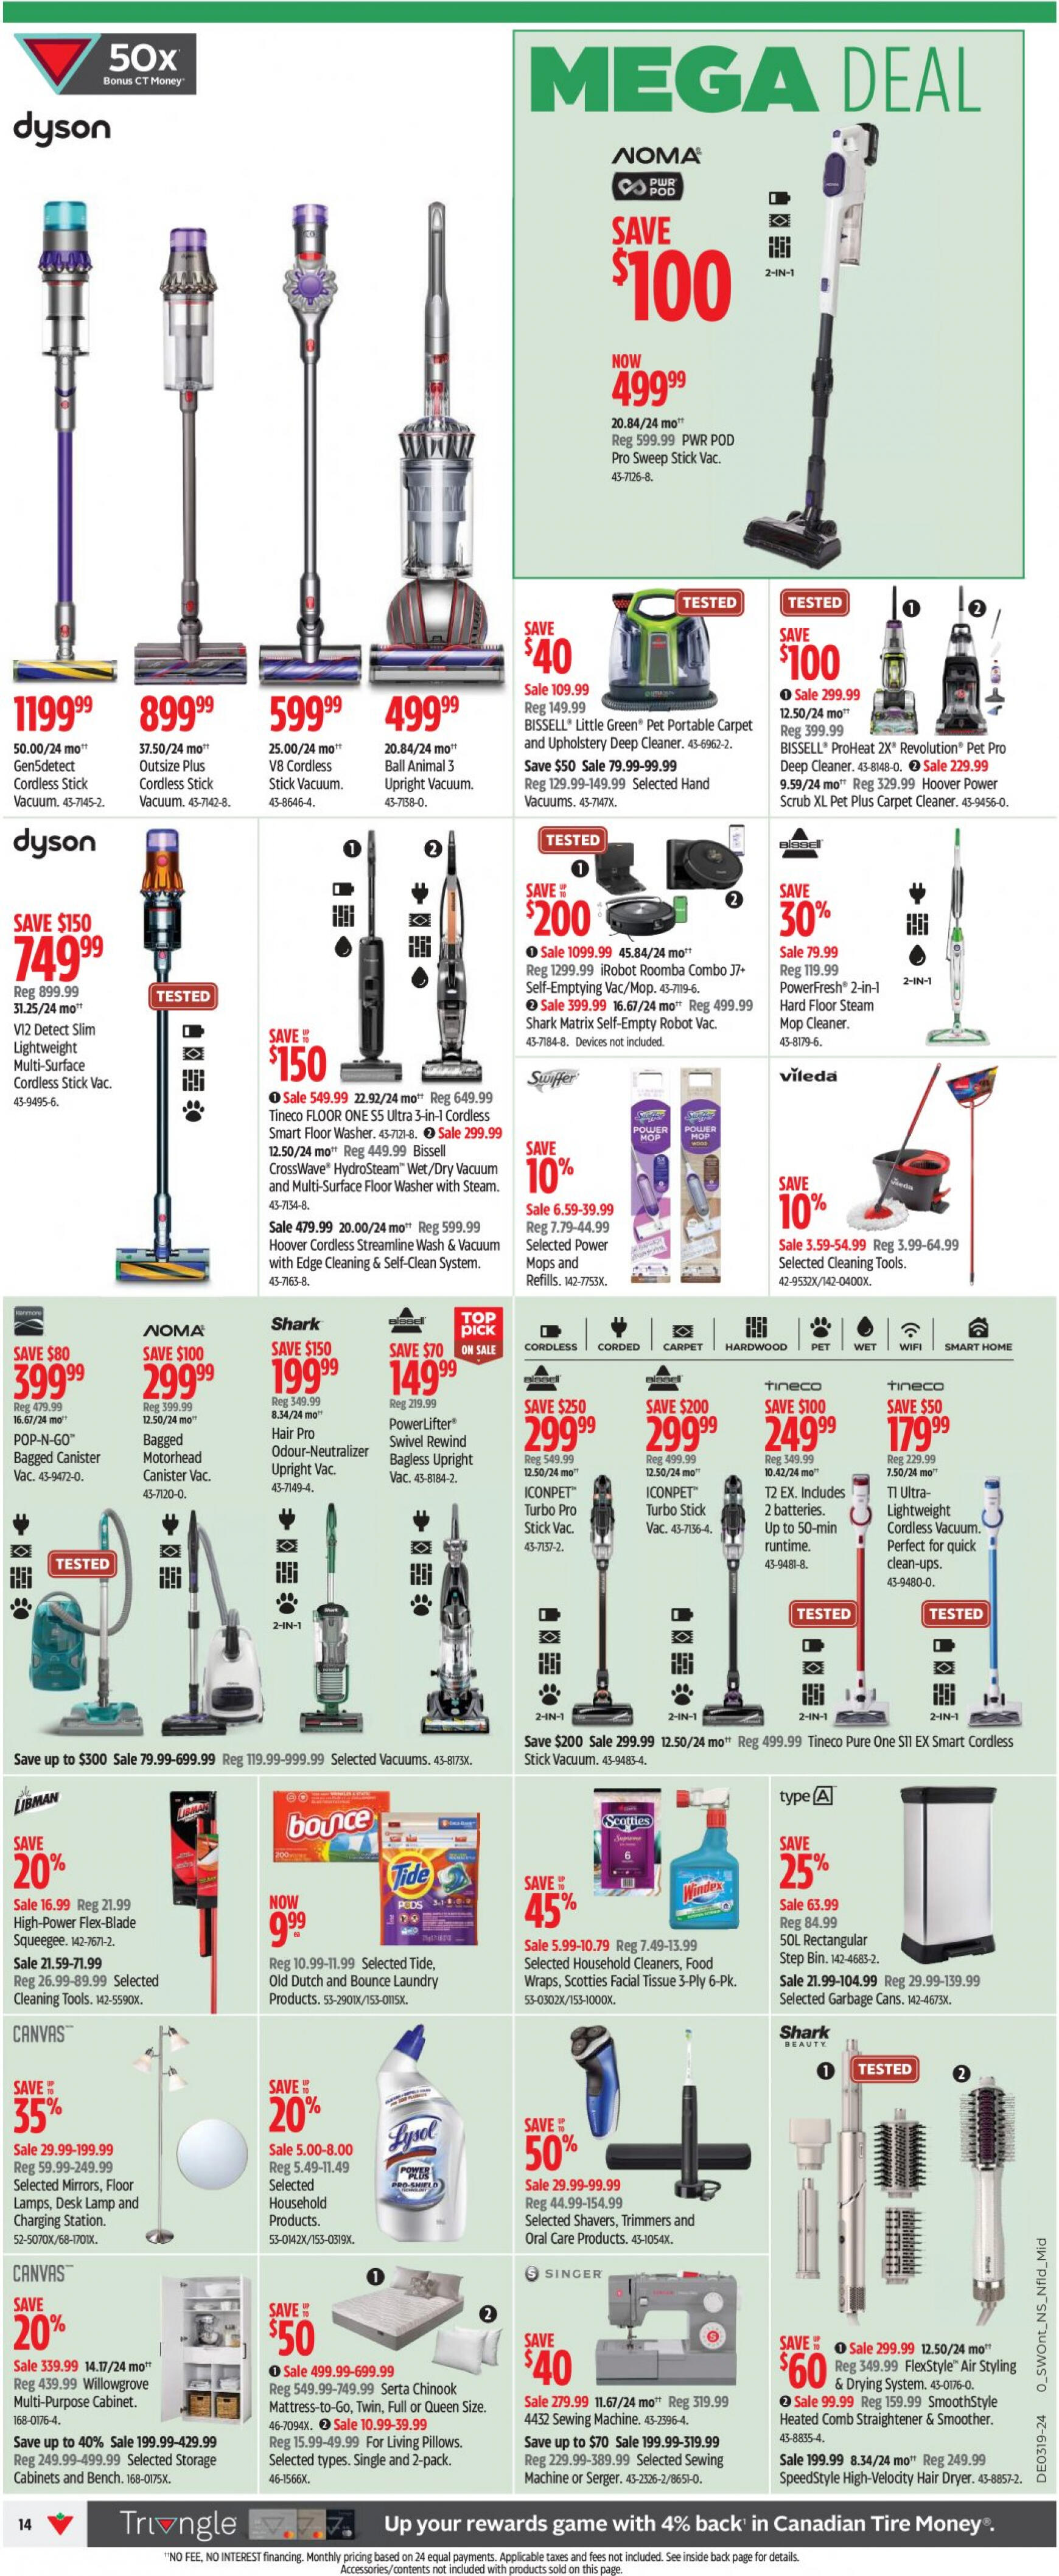 canadian-tire - Canadian Tire flyer current 02.05. - 08.05. - page: 13